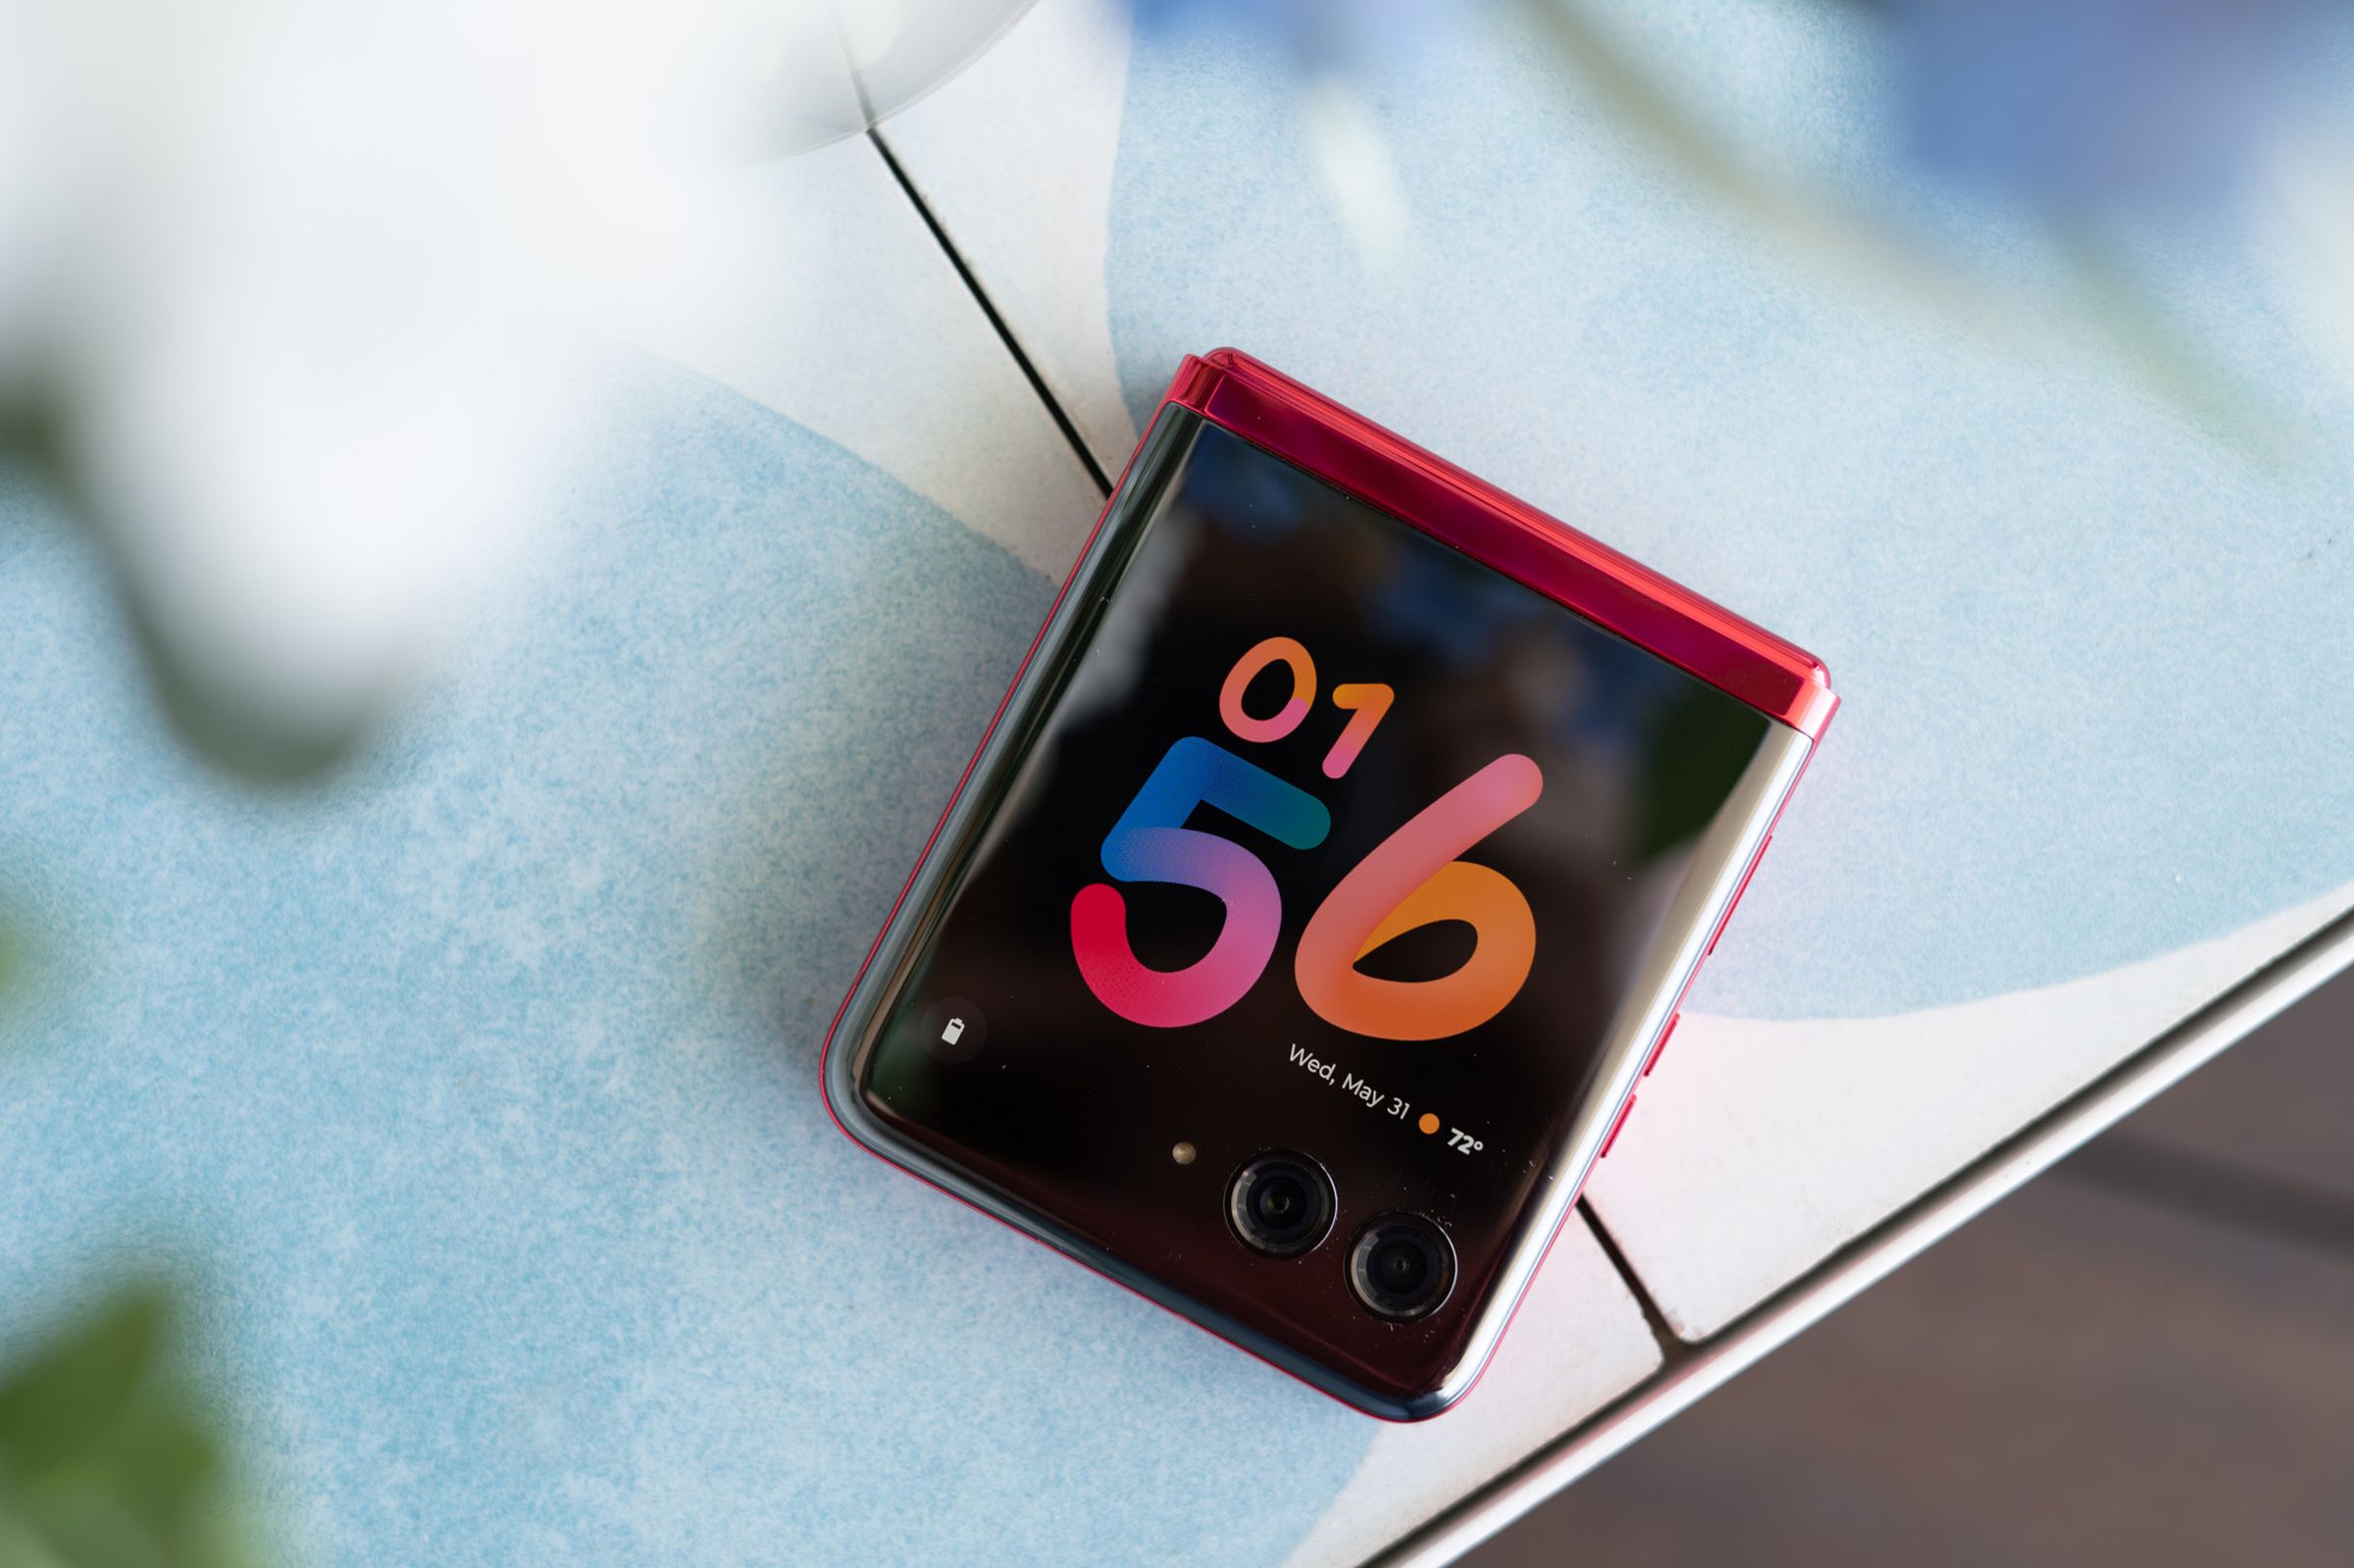 Motorola Razr Plus on a table top showing colorful clockface on cover screen.